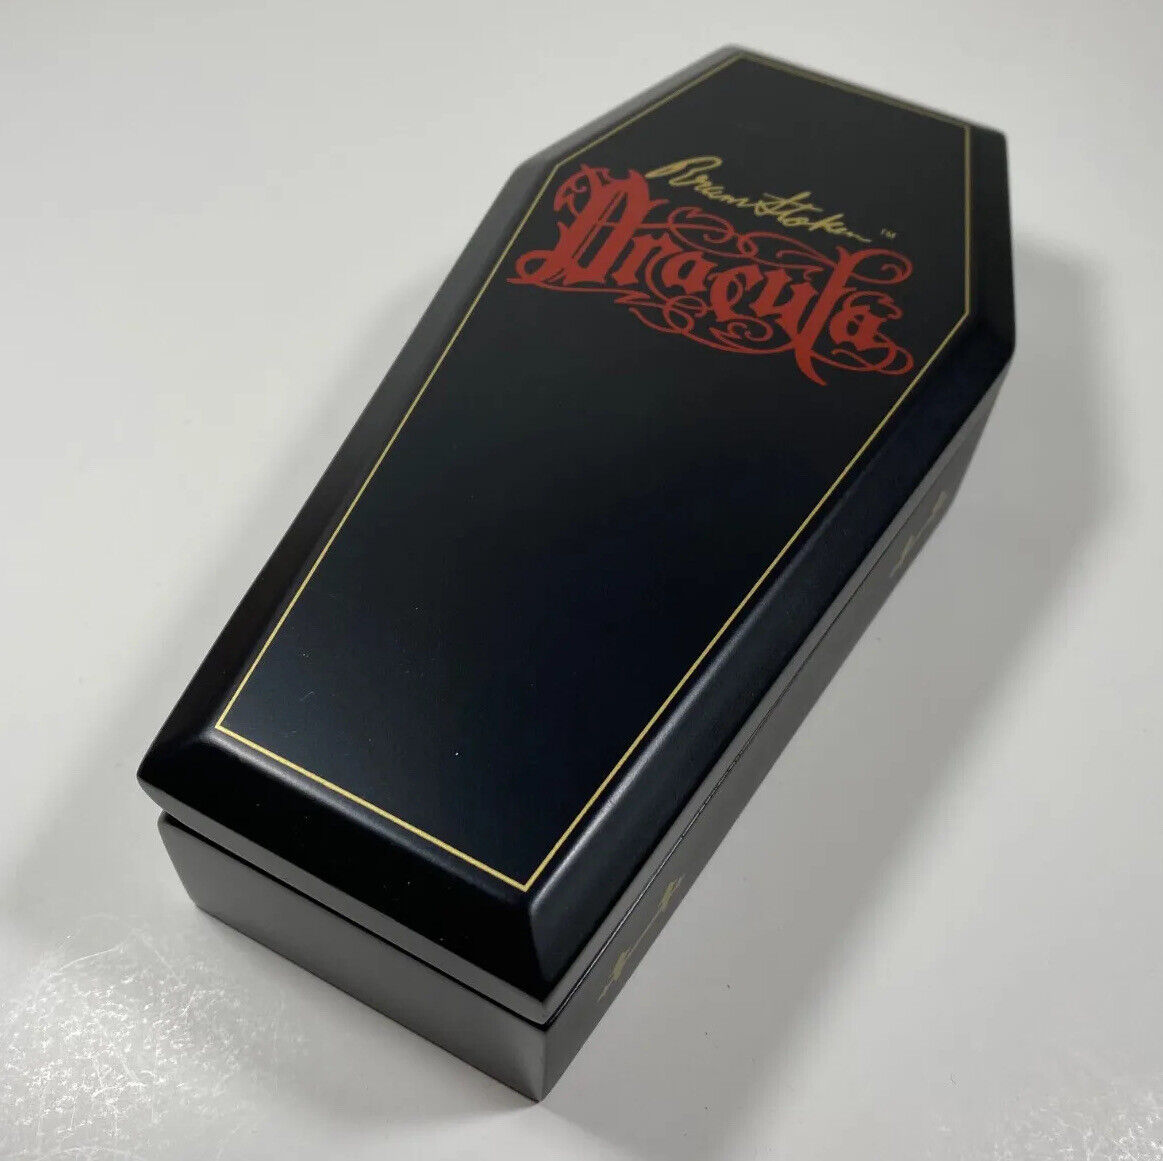 ACME Studio DRACULA Limited Edition FOUNTAIN Pen Packaged in a Coffin - NEW